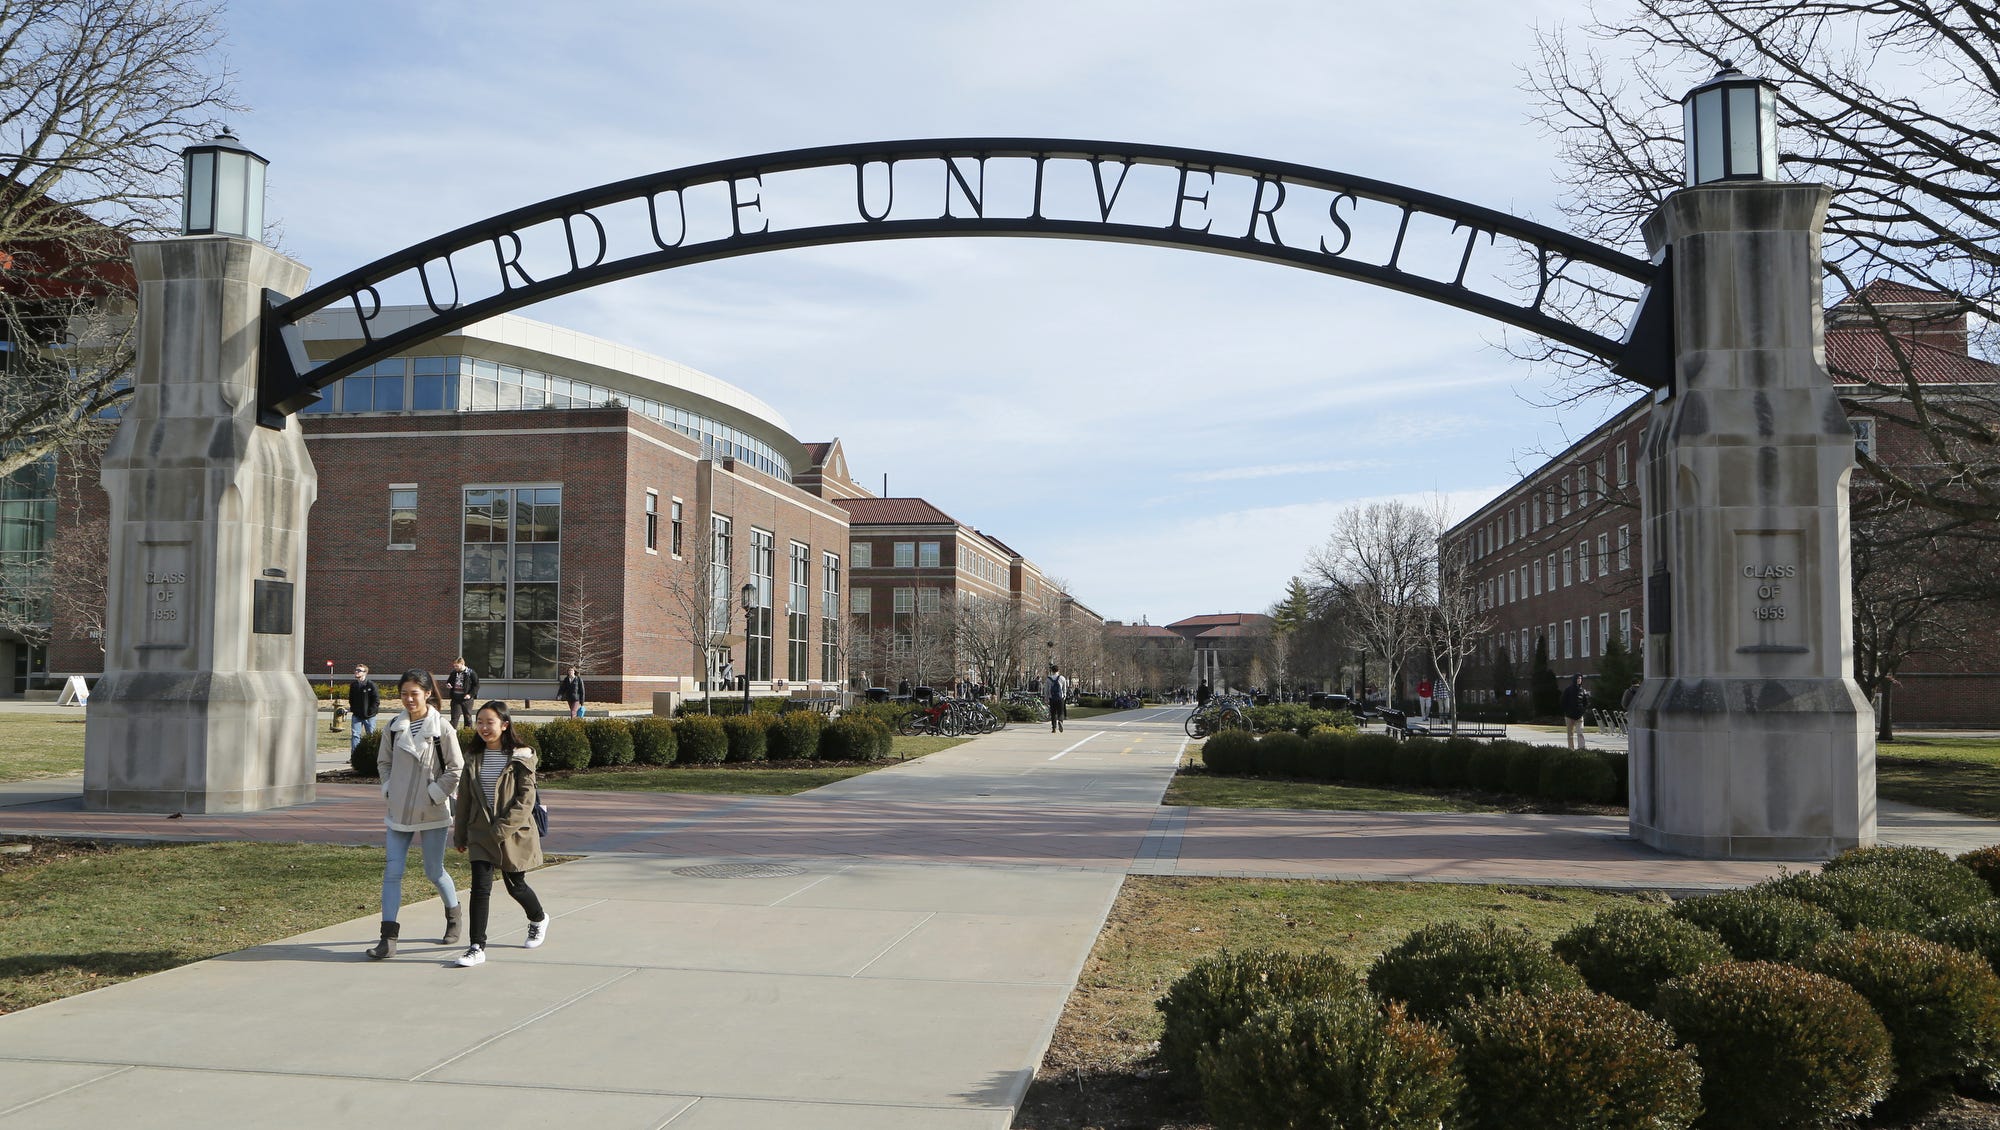 Purdue named top 20 public university by U.S. News & World Report